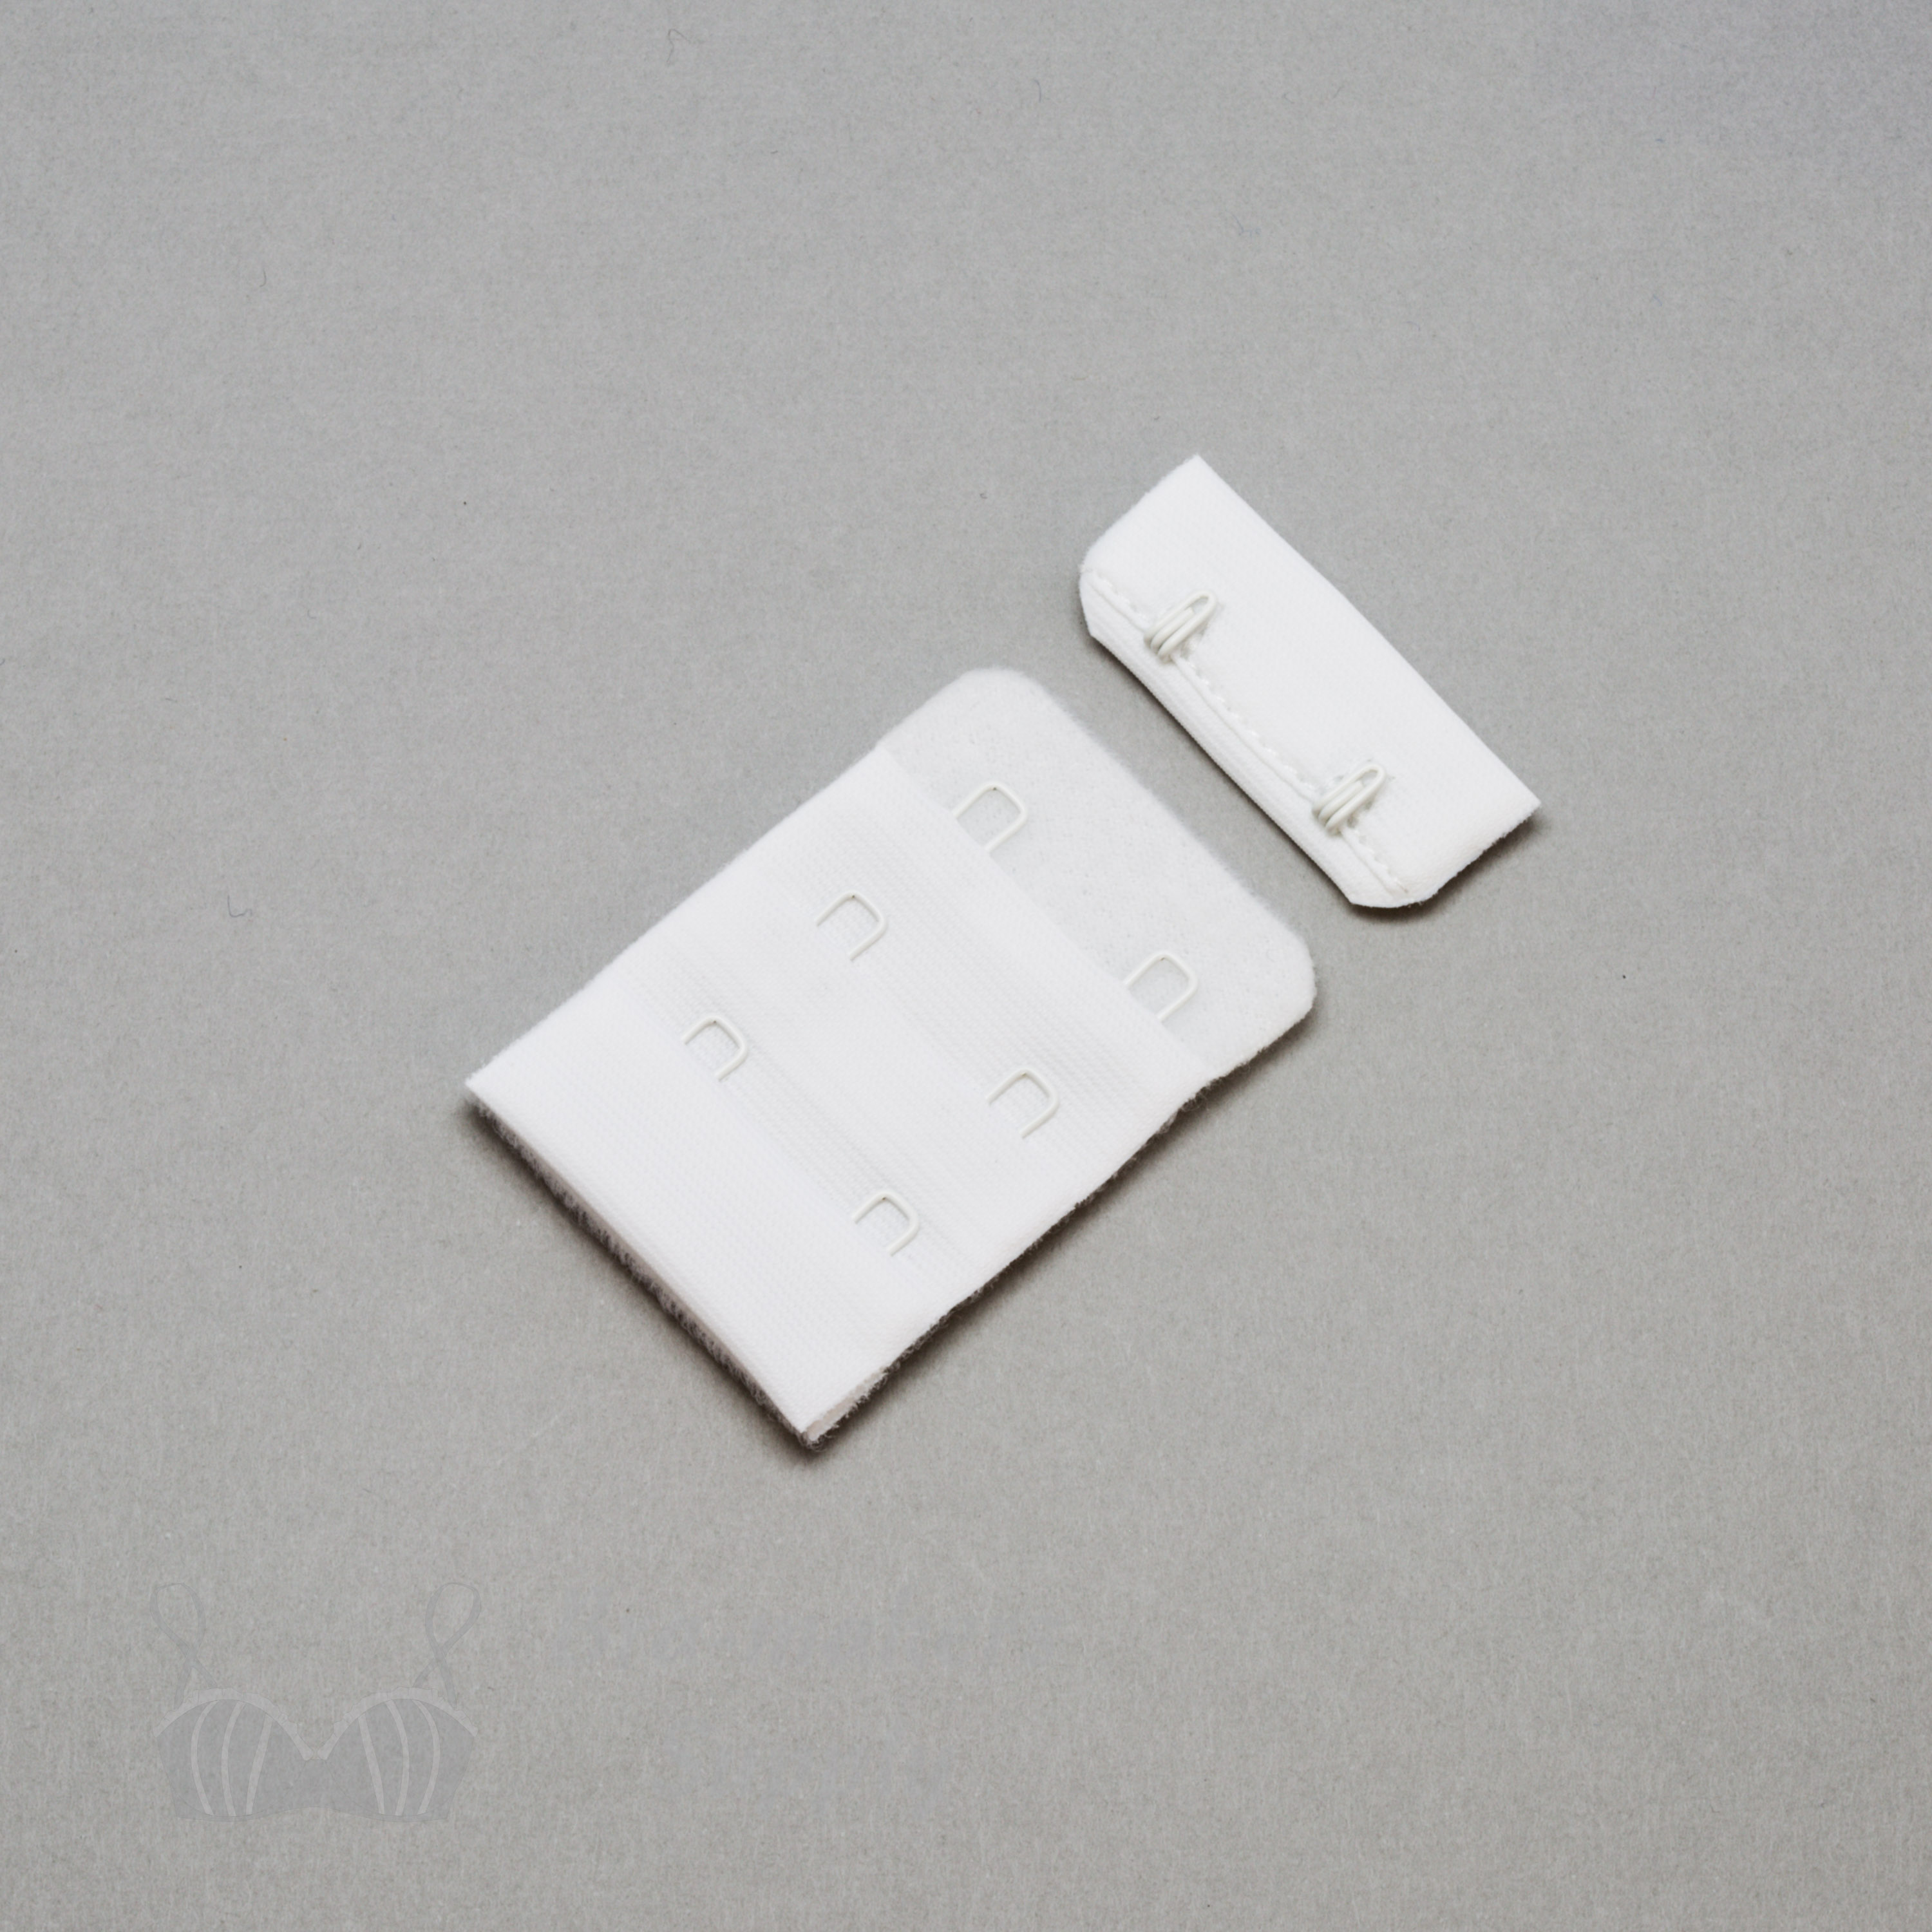 2x3 bra hook and eye white HS-23 or 2x3 hook and eye back closures bright white Pantone 11-0601 from Bra-Makers Supply front shown